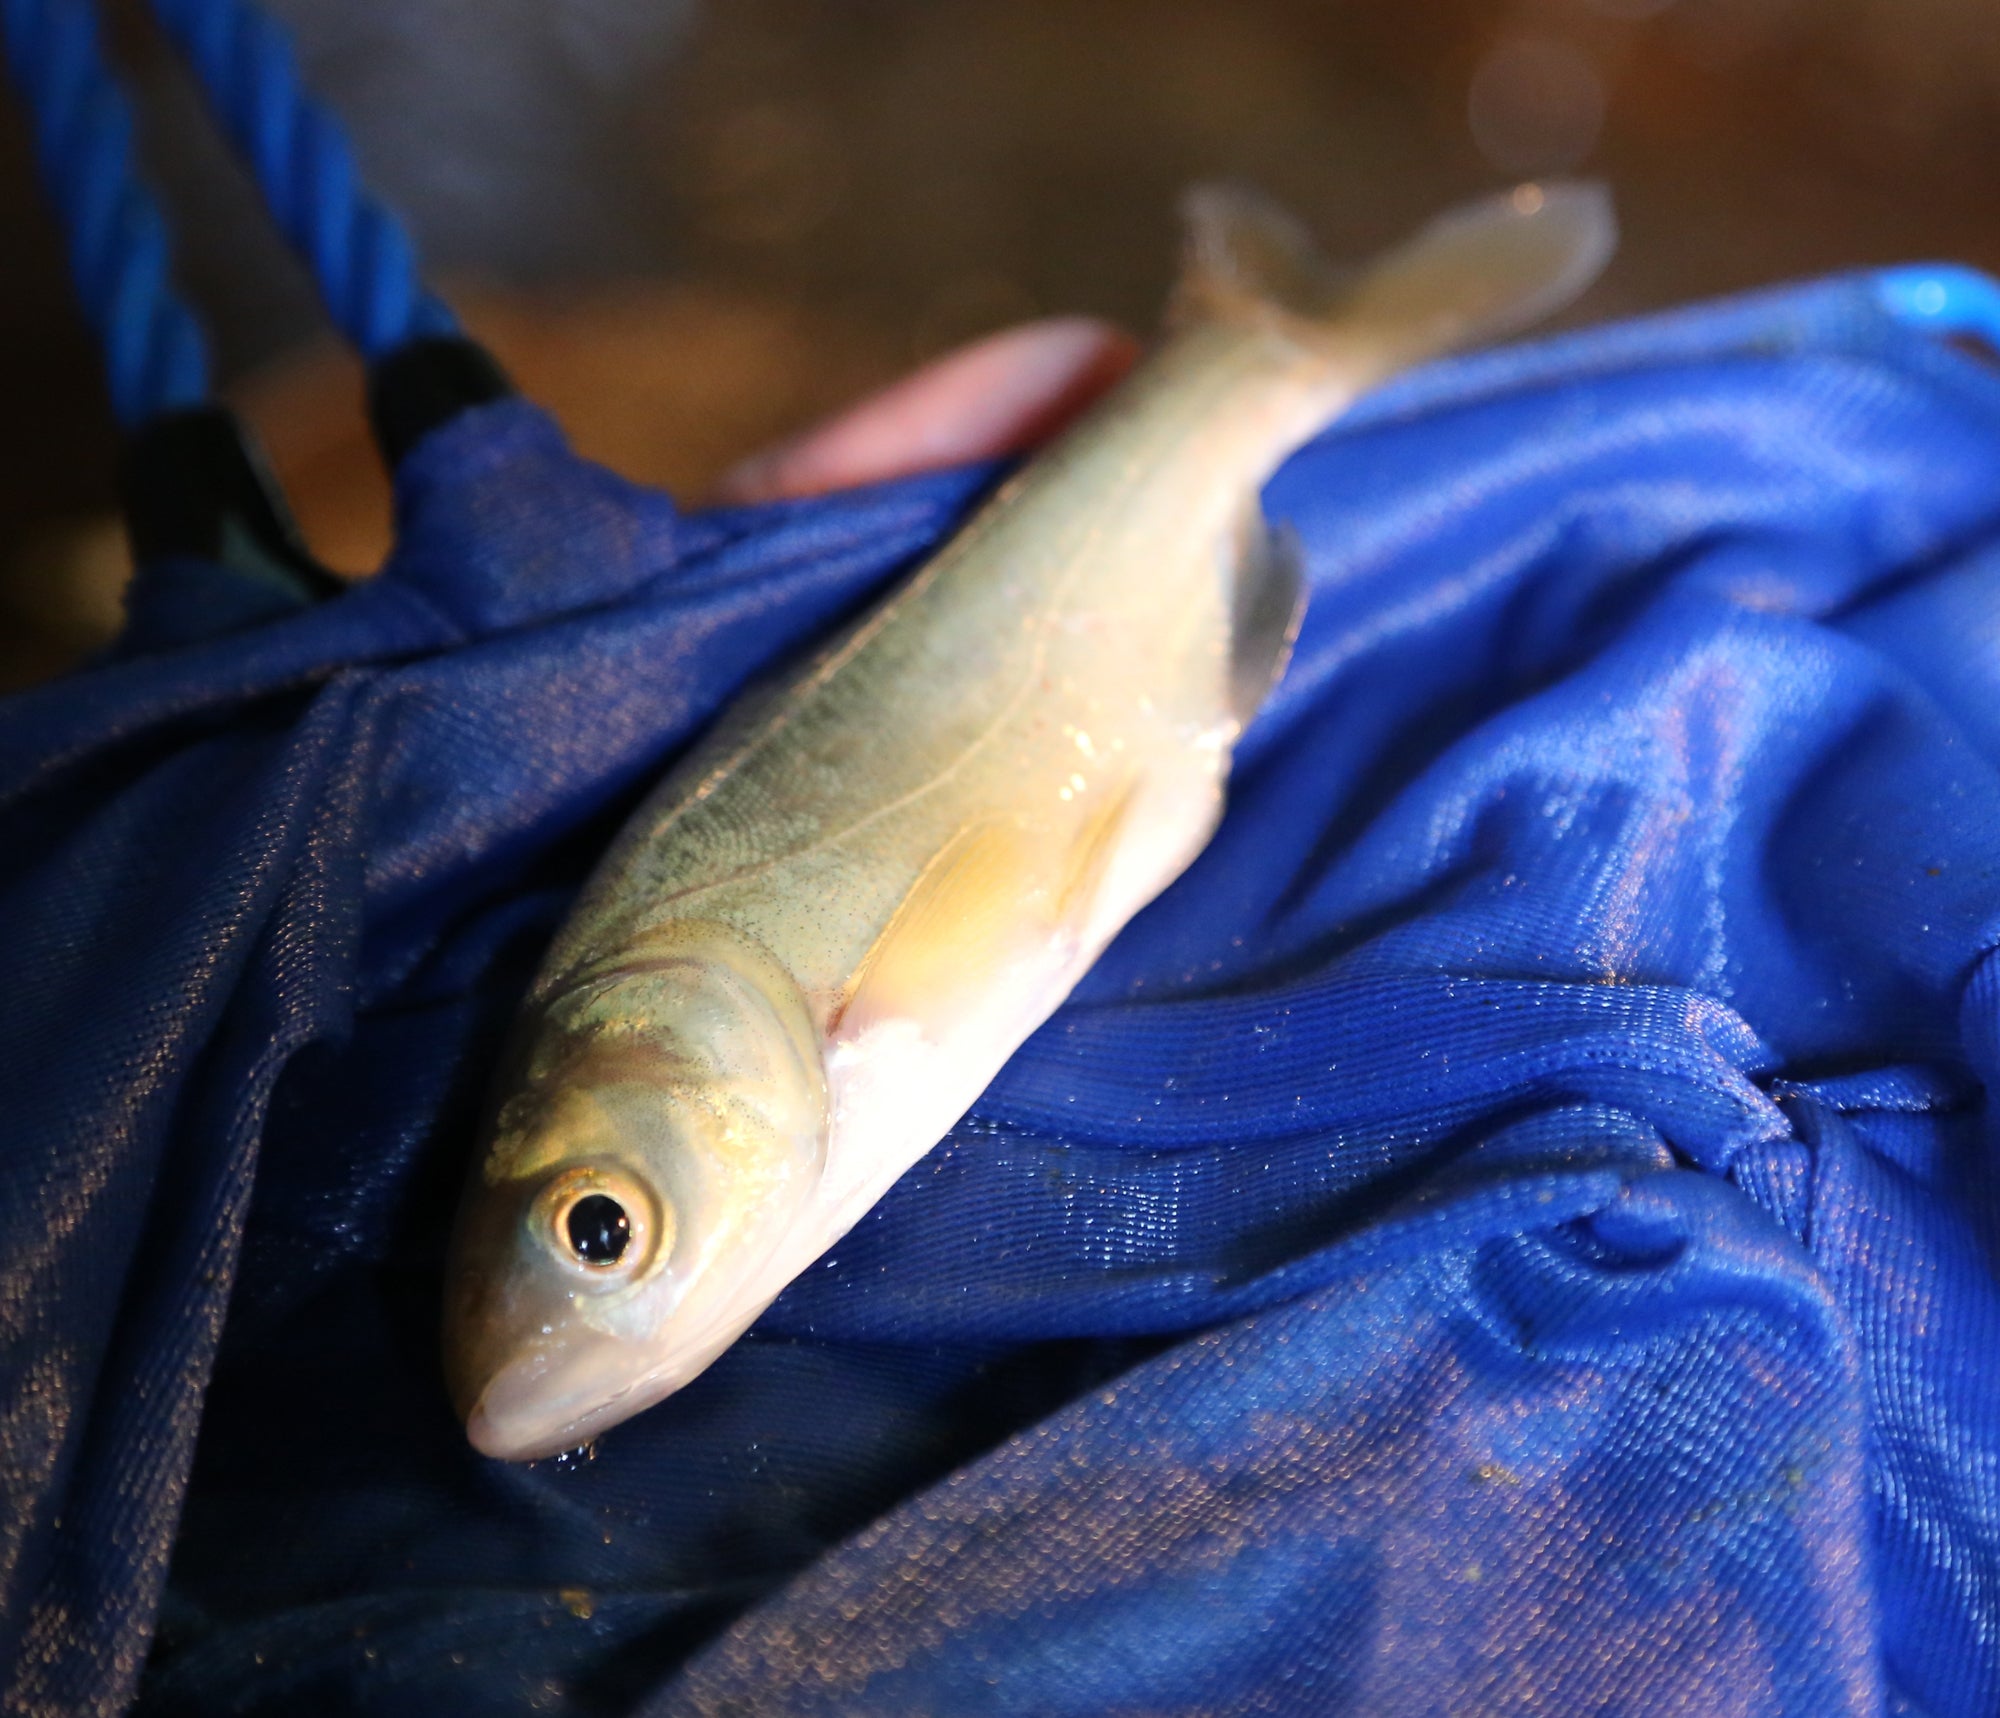 A 1-year-old bighead carp. (Photo: Dennis Anderson/Star Tribune, Getty Images)